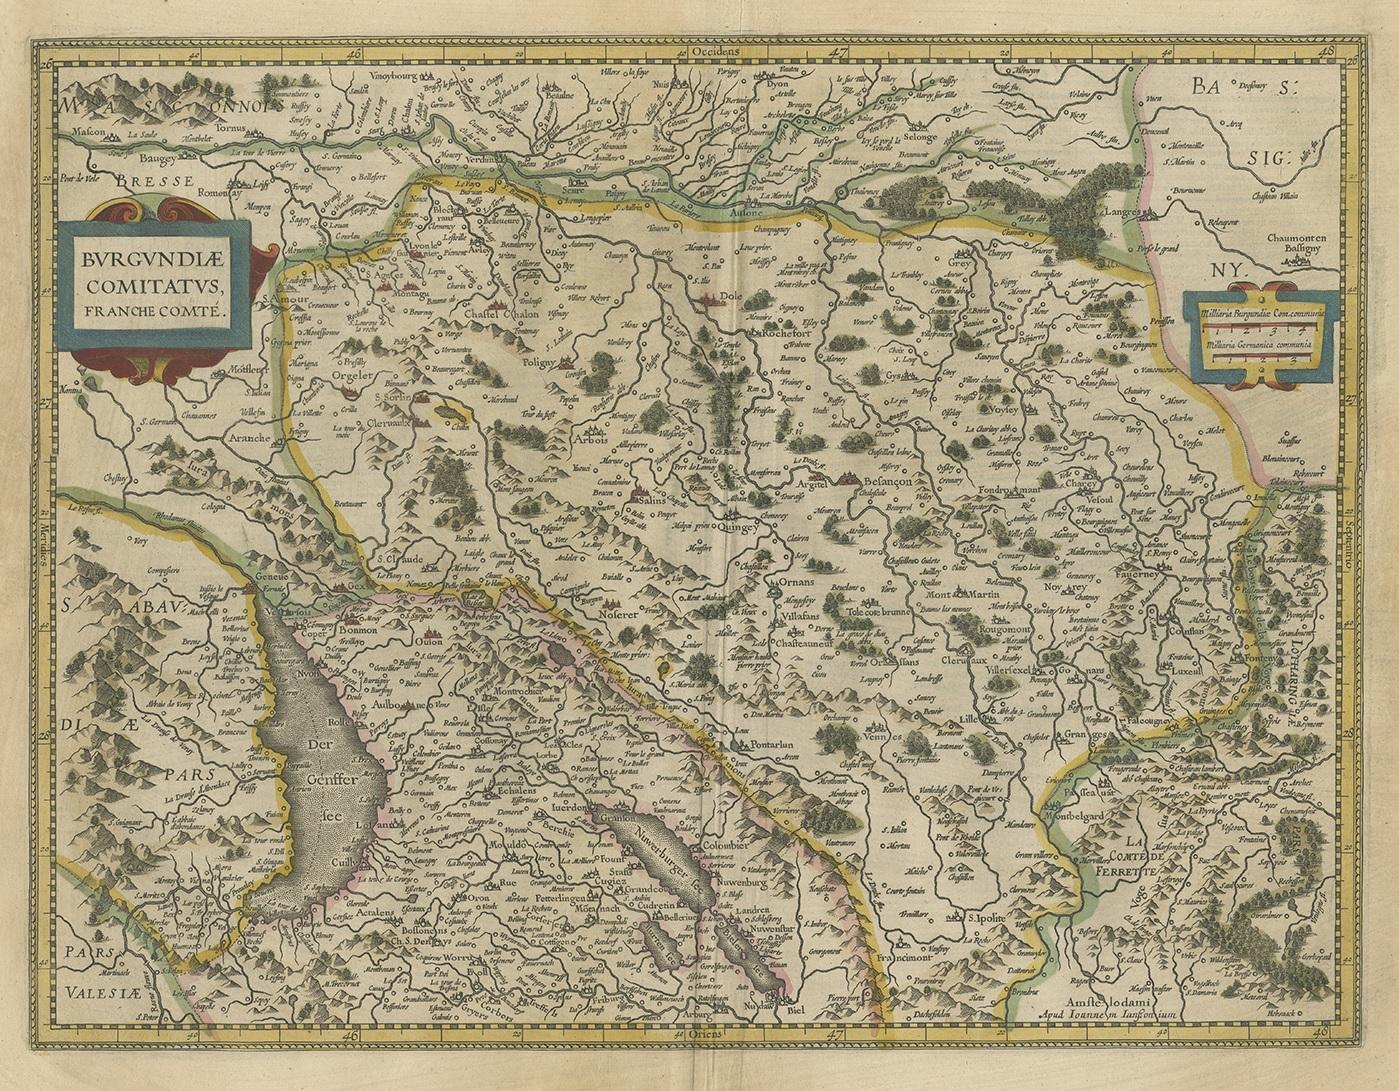 Antique map titled 'Burgundiae Comitatus Franche Comté'. Old map of the historical and former region of Franche-Comté, France. As a region, it encompassed the eastern departements of Jura, Doubs, Haute-Saône, and the Territoire de Belfort. It shows